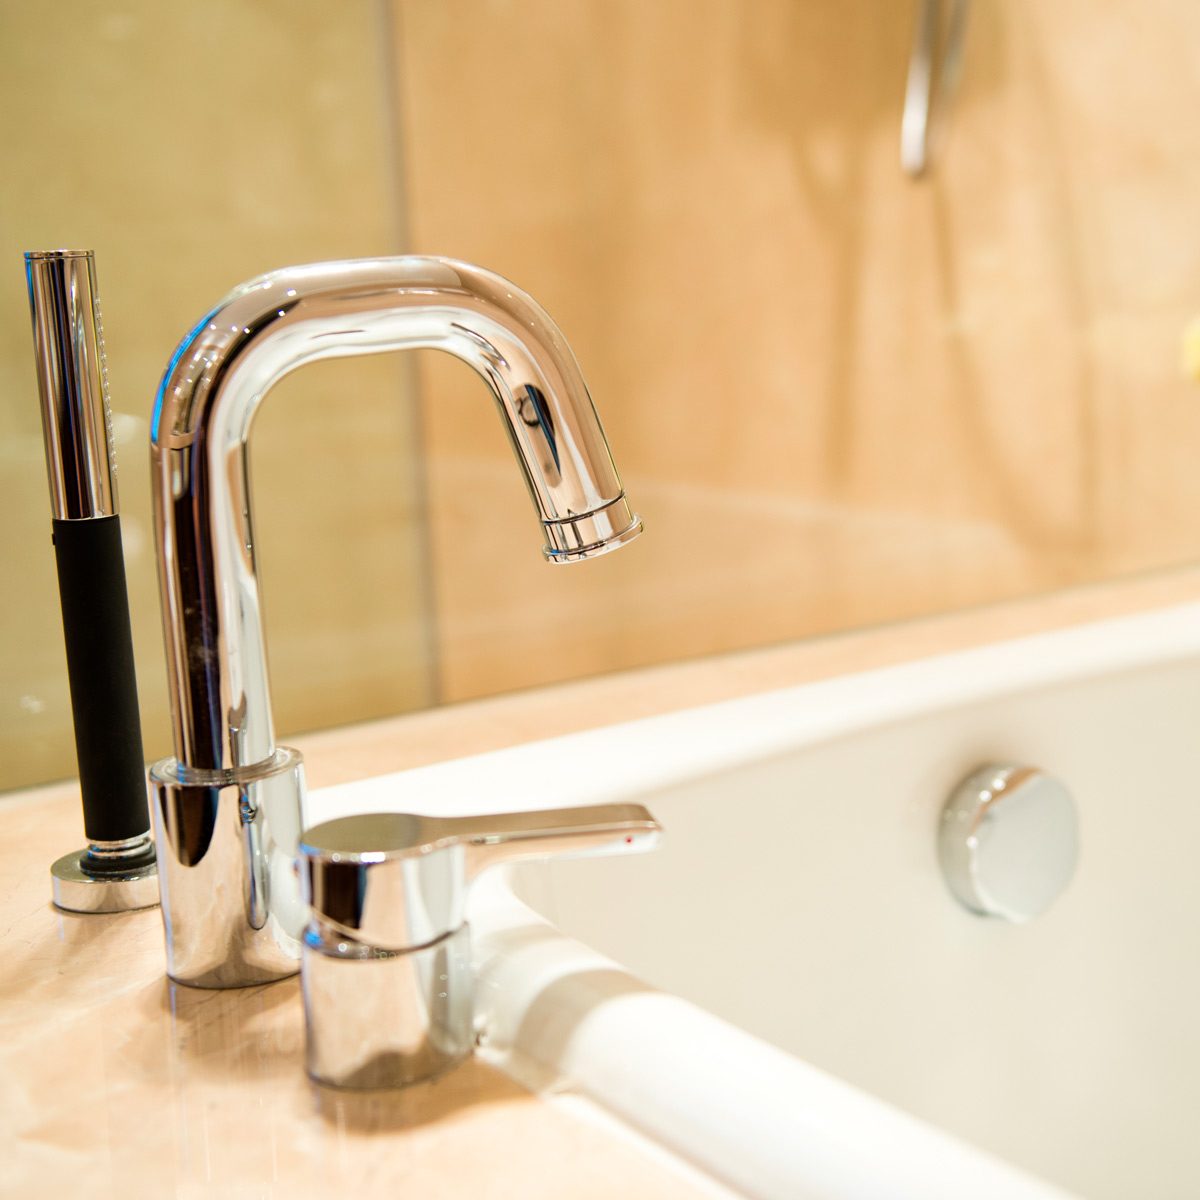 How To Clean a Bathroom Sink: 12 Best Tips